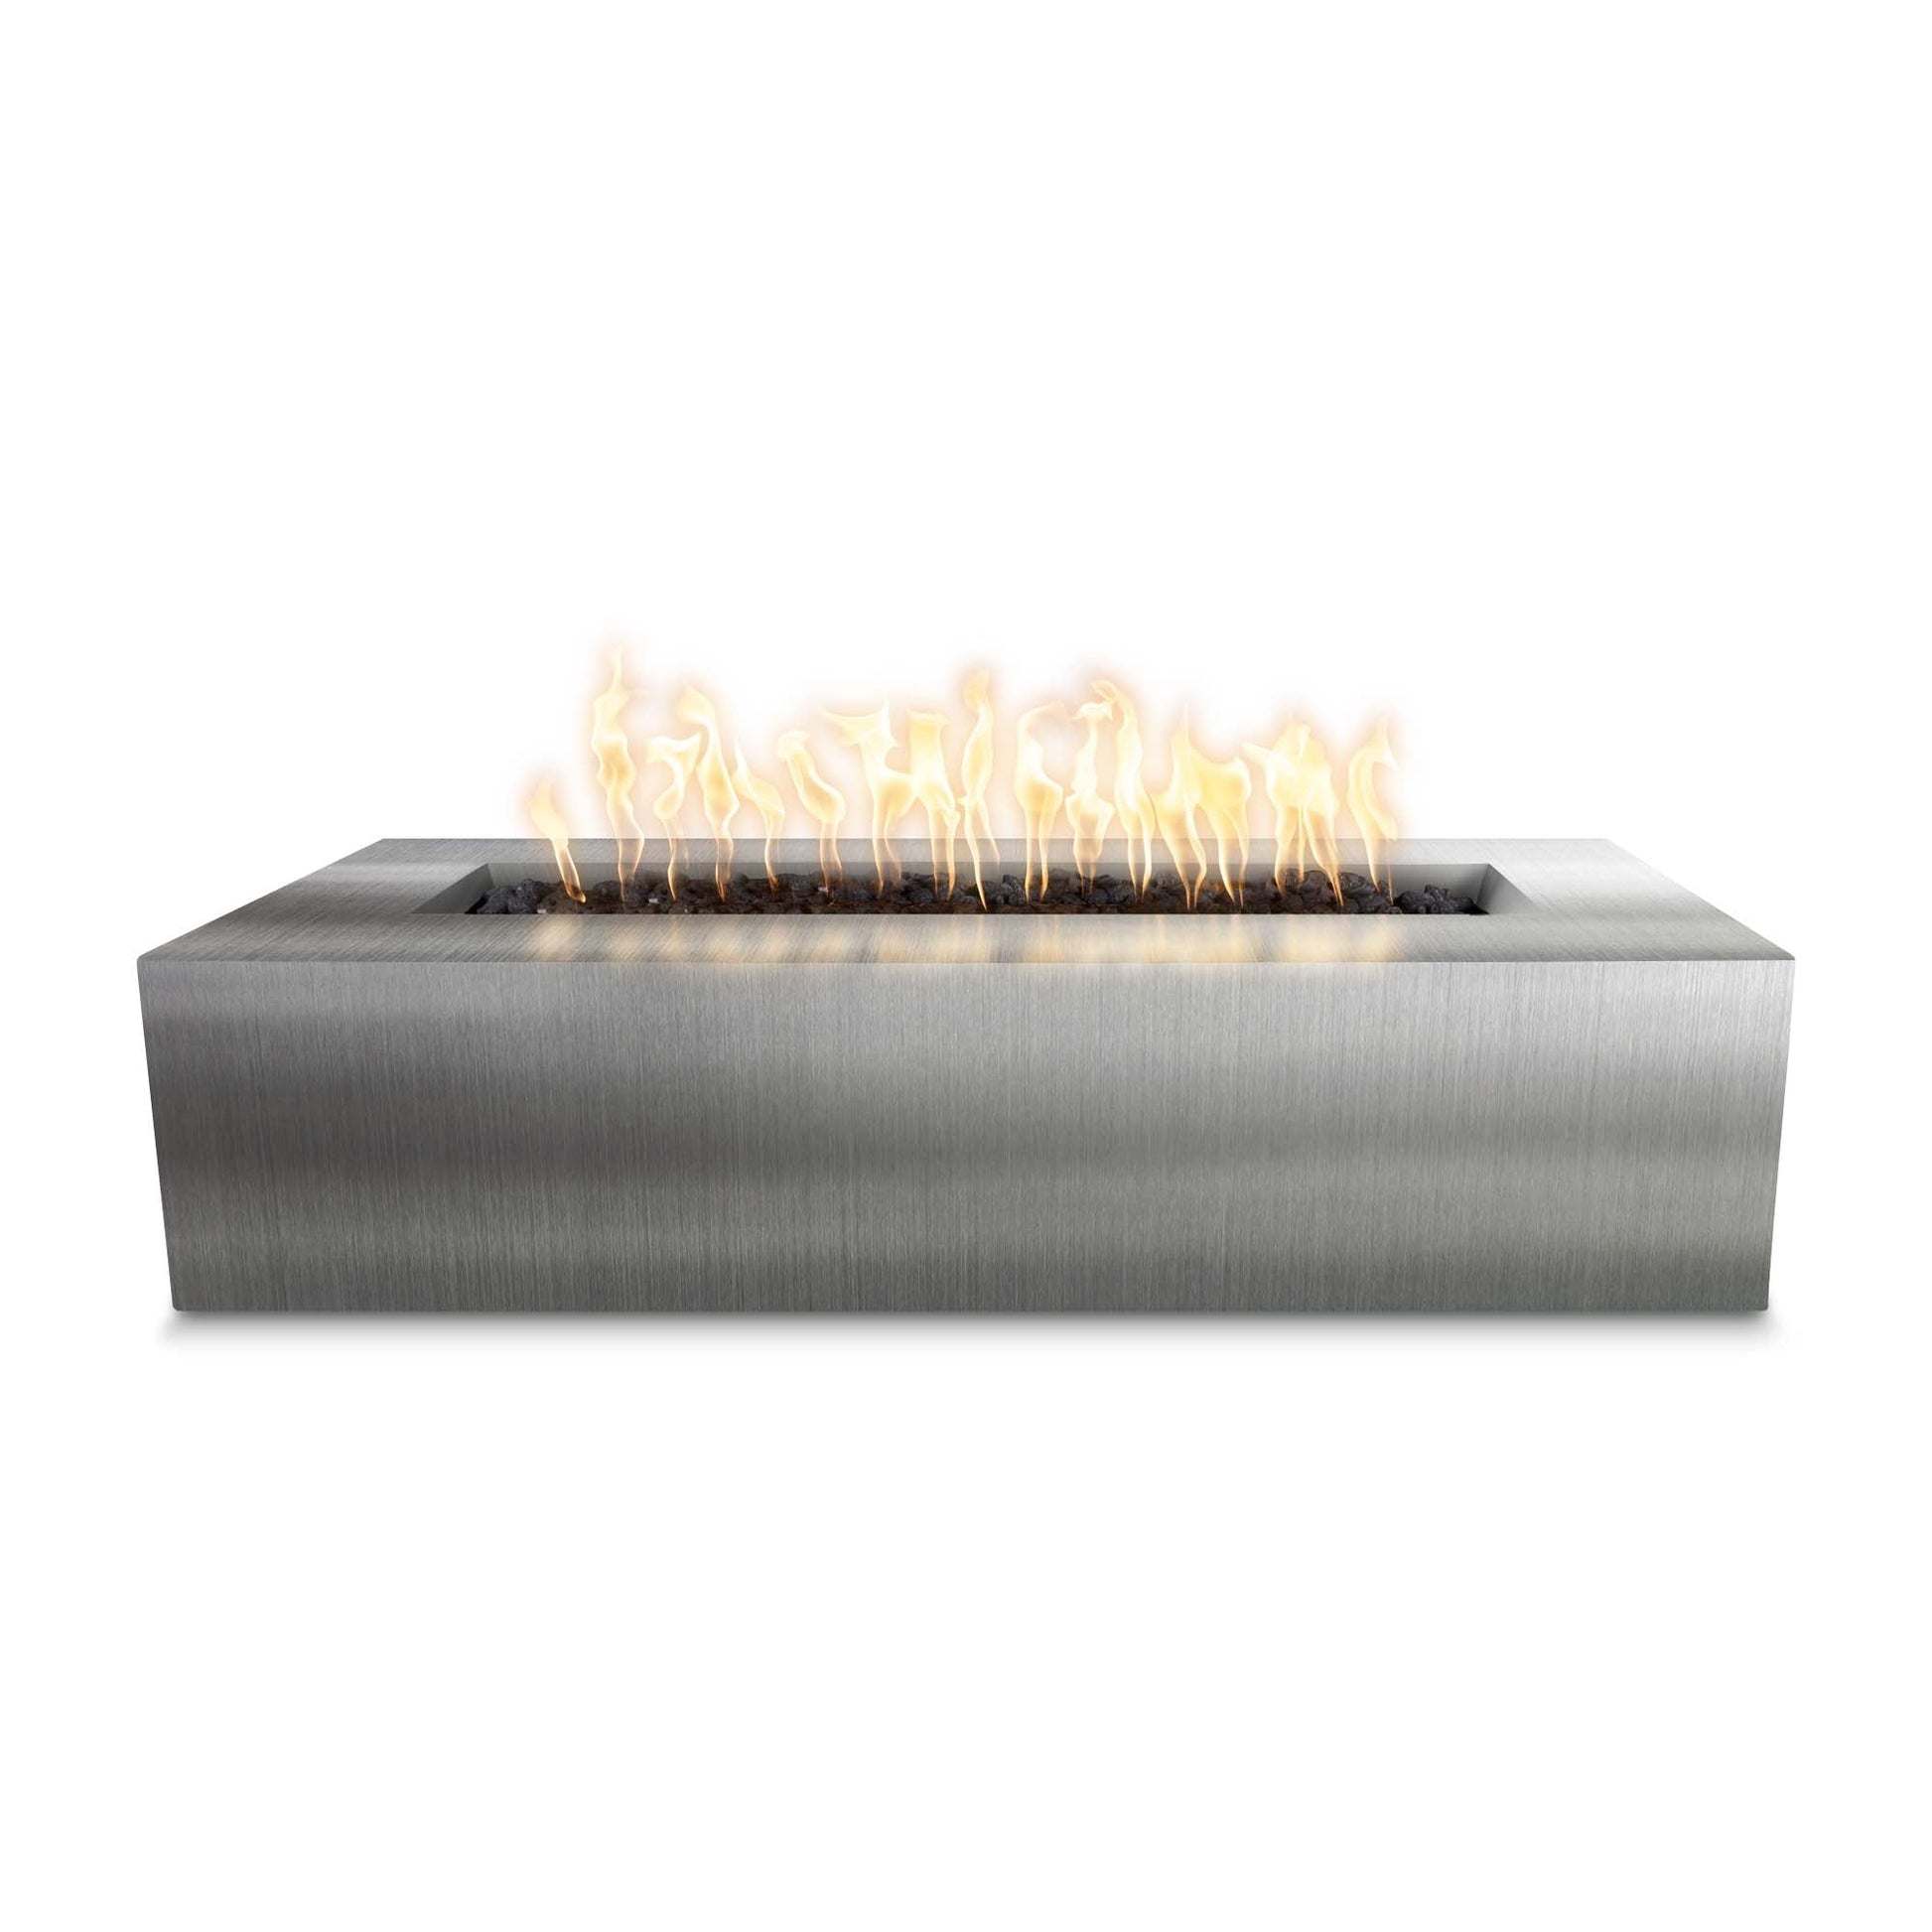 The Outdoor Plus Rectangular Regal 60" Stainless Steel Liquid Propane Fire Pit with Match Lit Ignition